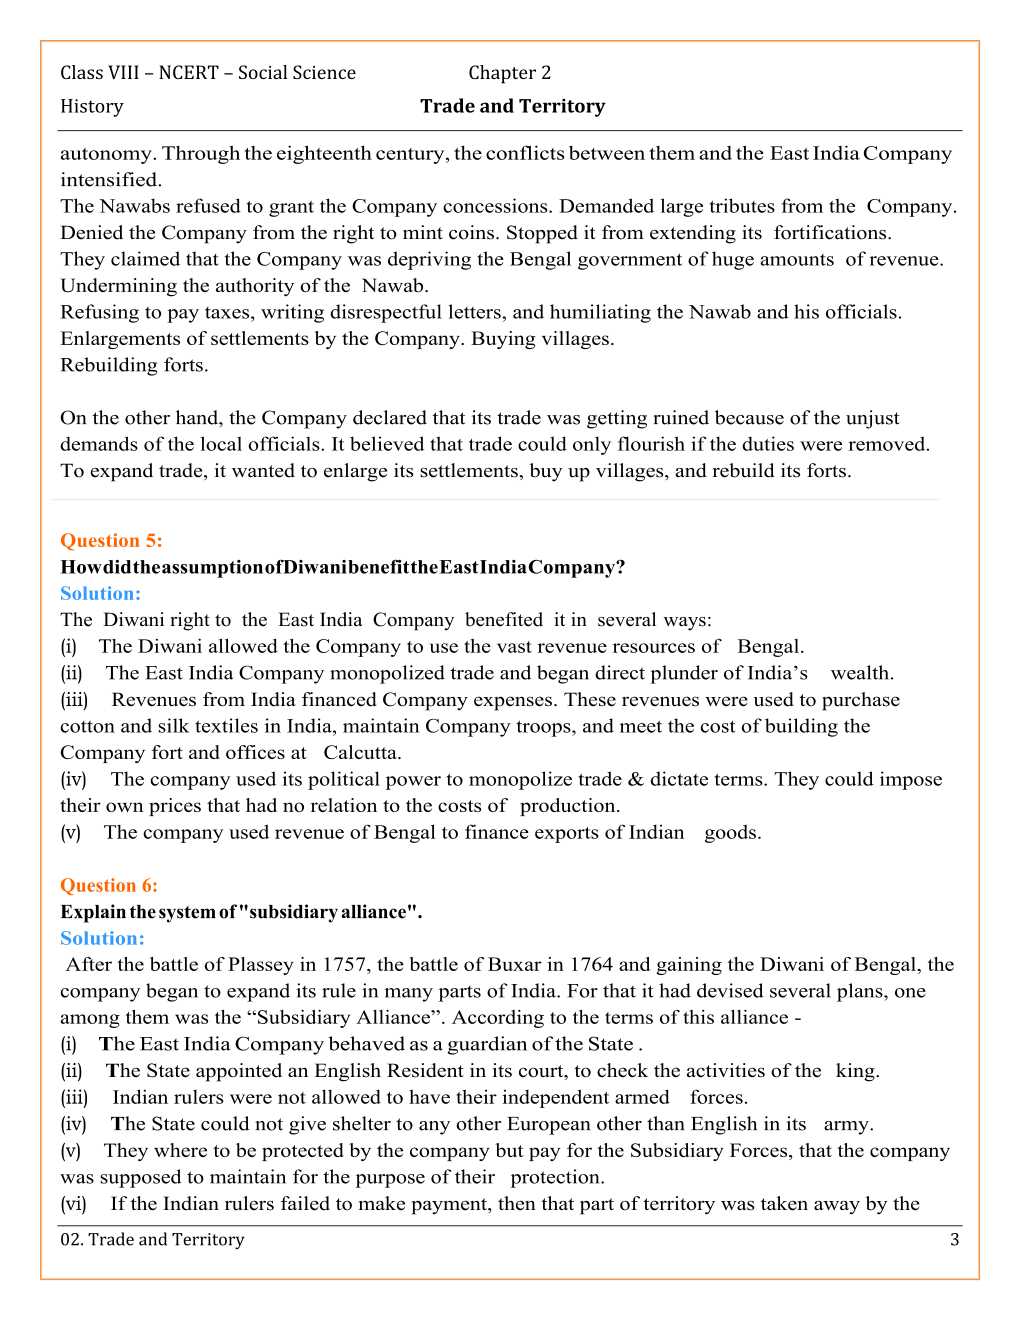 NCERT Solutions For Class 8 Social Science Our Pasts 3 Chapter 2 